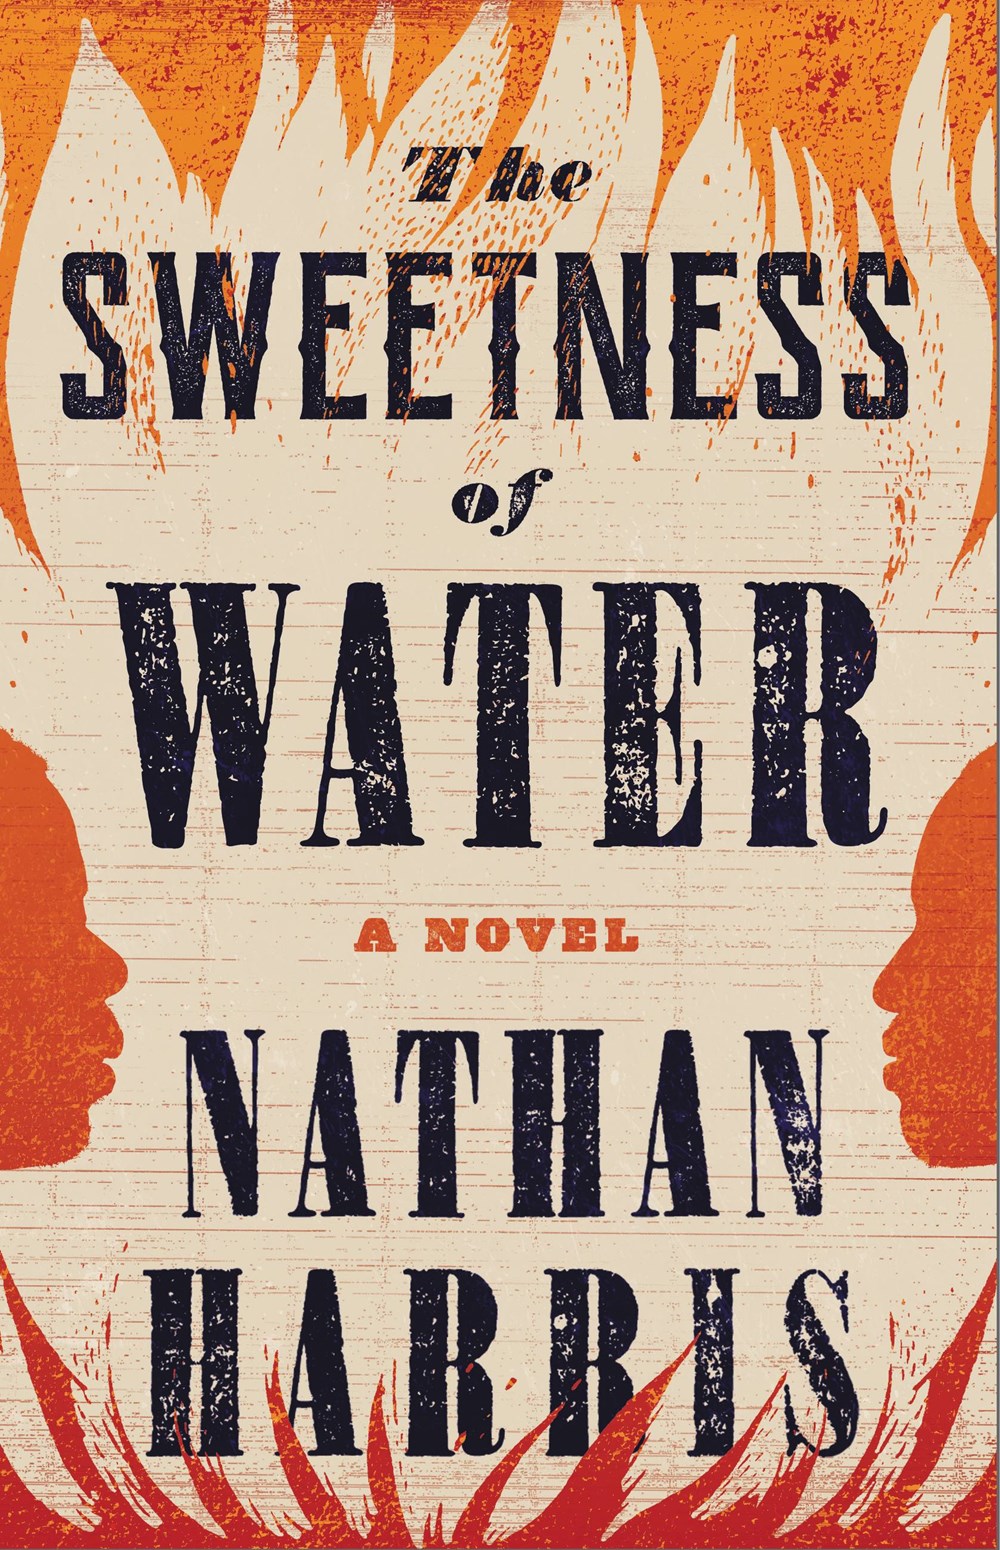 book cover of The Sweetness of Water: A Novel by Nathan Harris. The text is black and distress. The background is tan, and there are orange silhouettes of two Black men facing each other from opposite sides of the image.